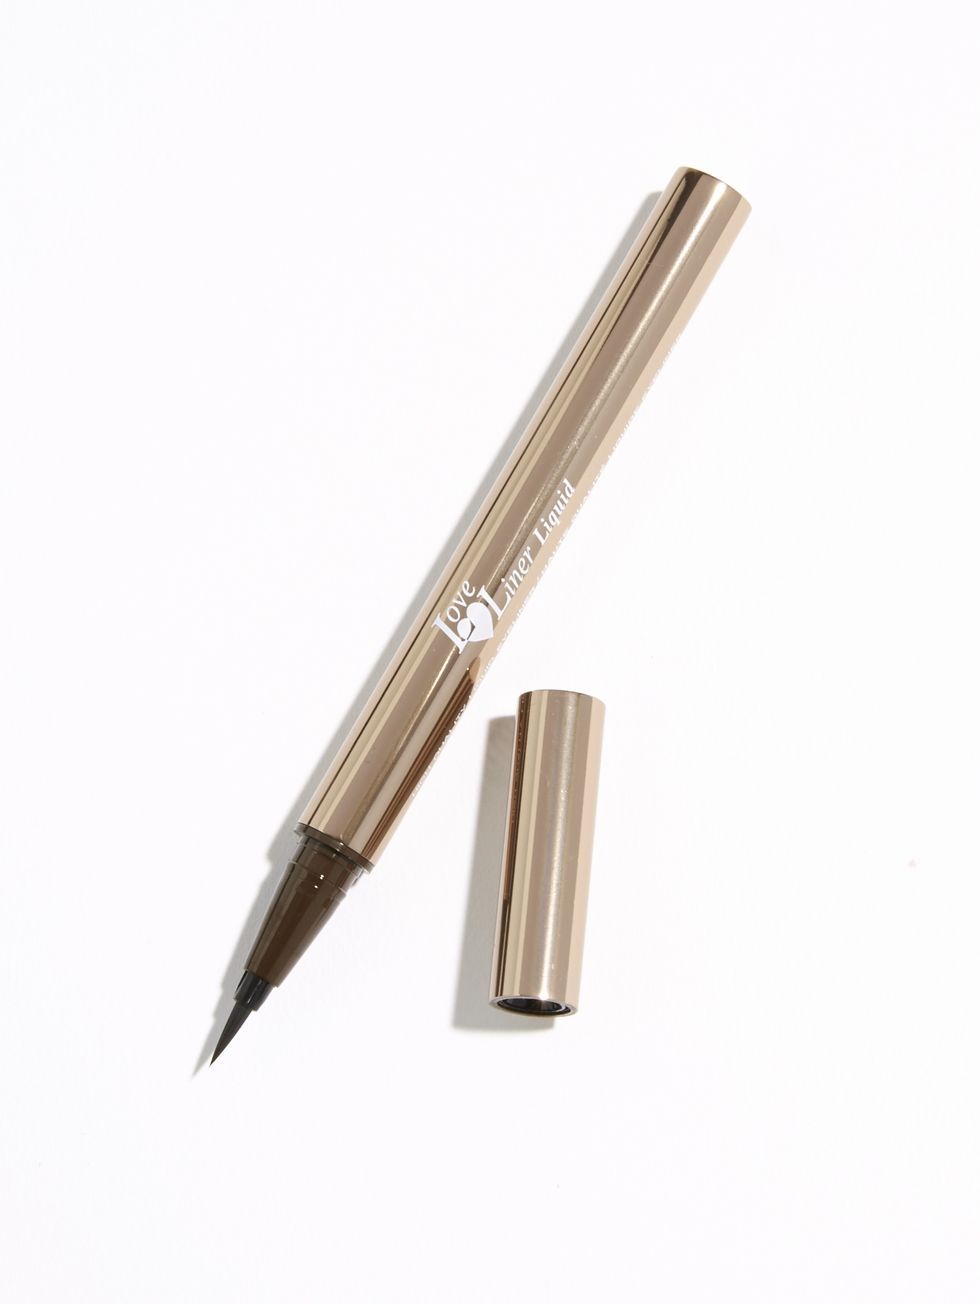 Brown, Writing implement, Stationery, Office supplies, Beige, Metal, Material property, Cosmetics, Office instrument, Pen, 